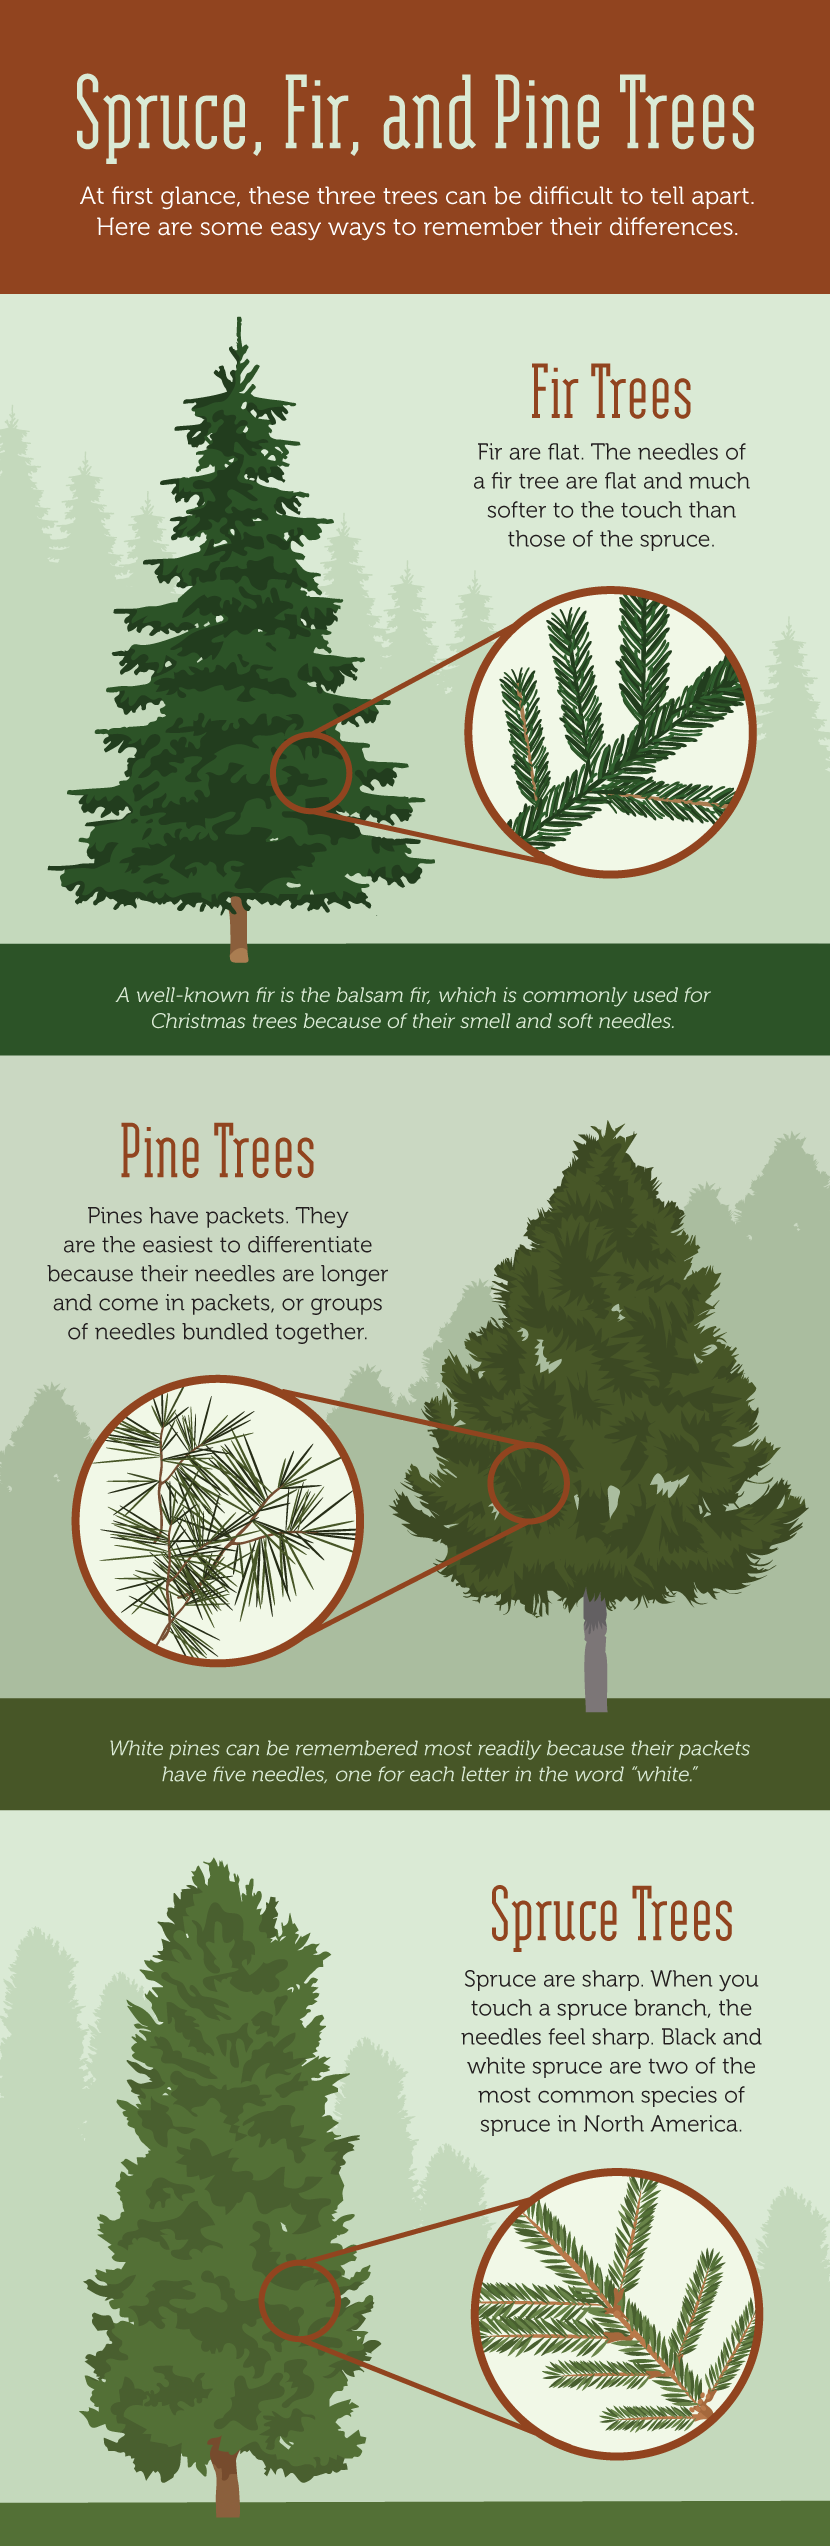 Spruce, Fir, and Pine - Learning to Read the Forest